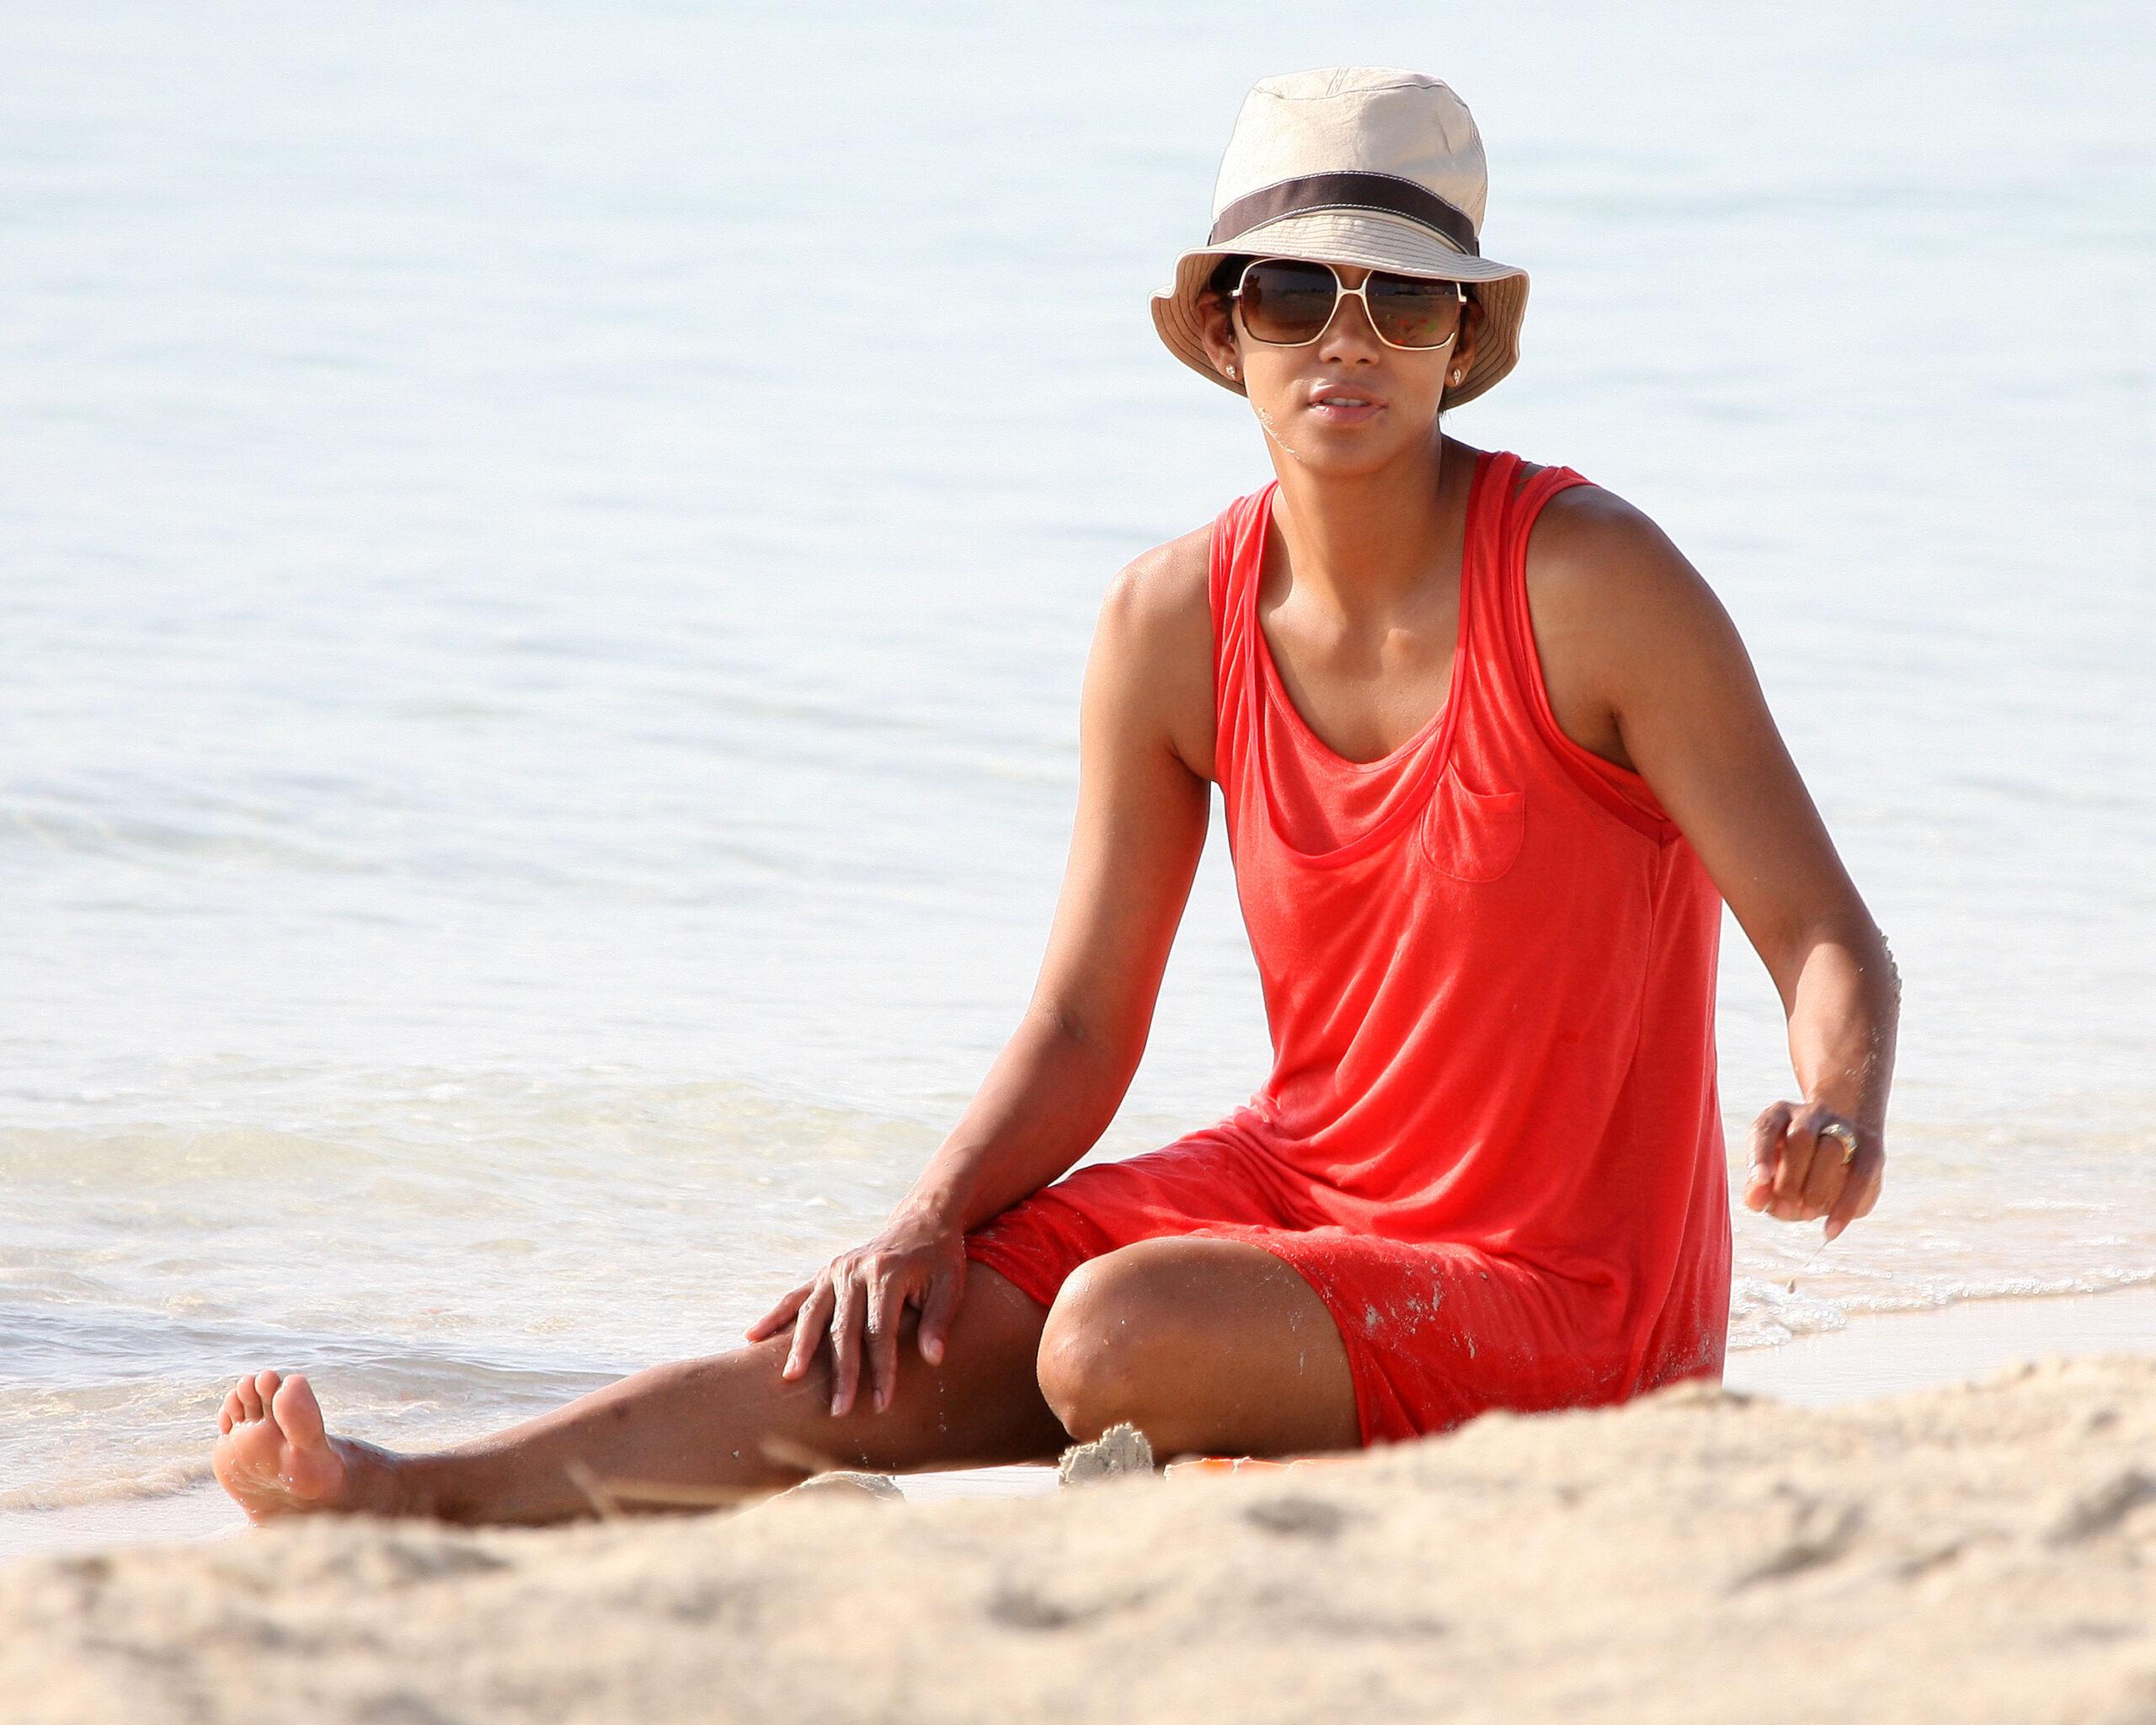 Halle Berry is spotted with her daughter on the beach in South Beach Miami on 07 08 2009